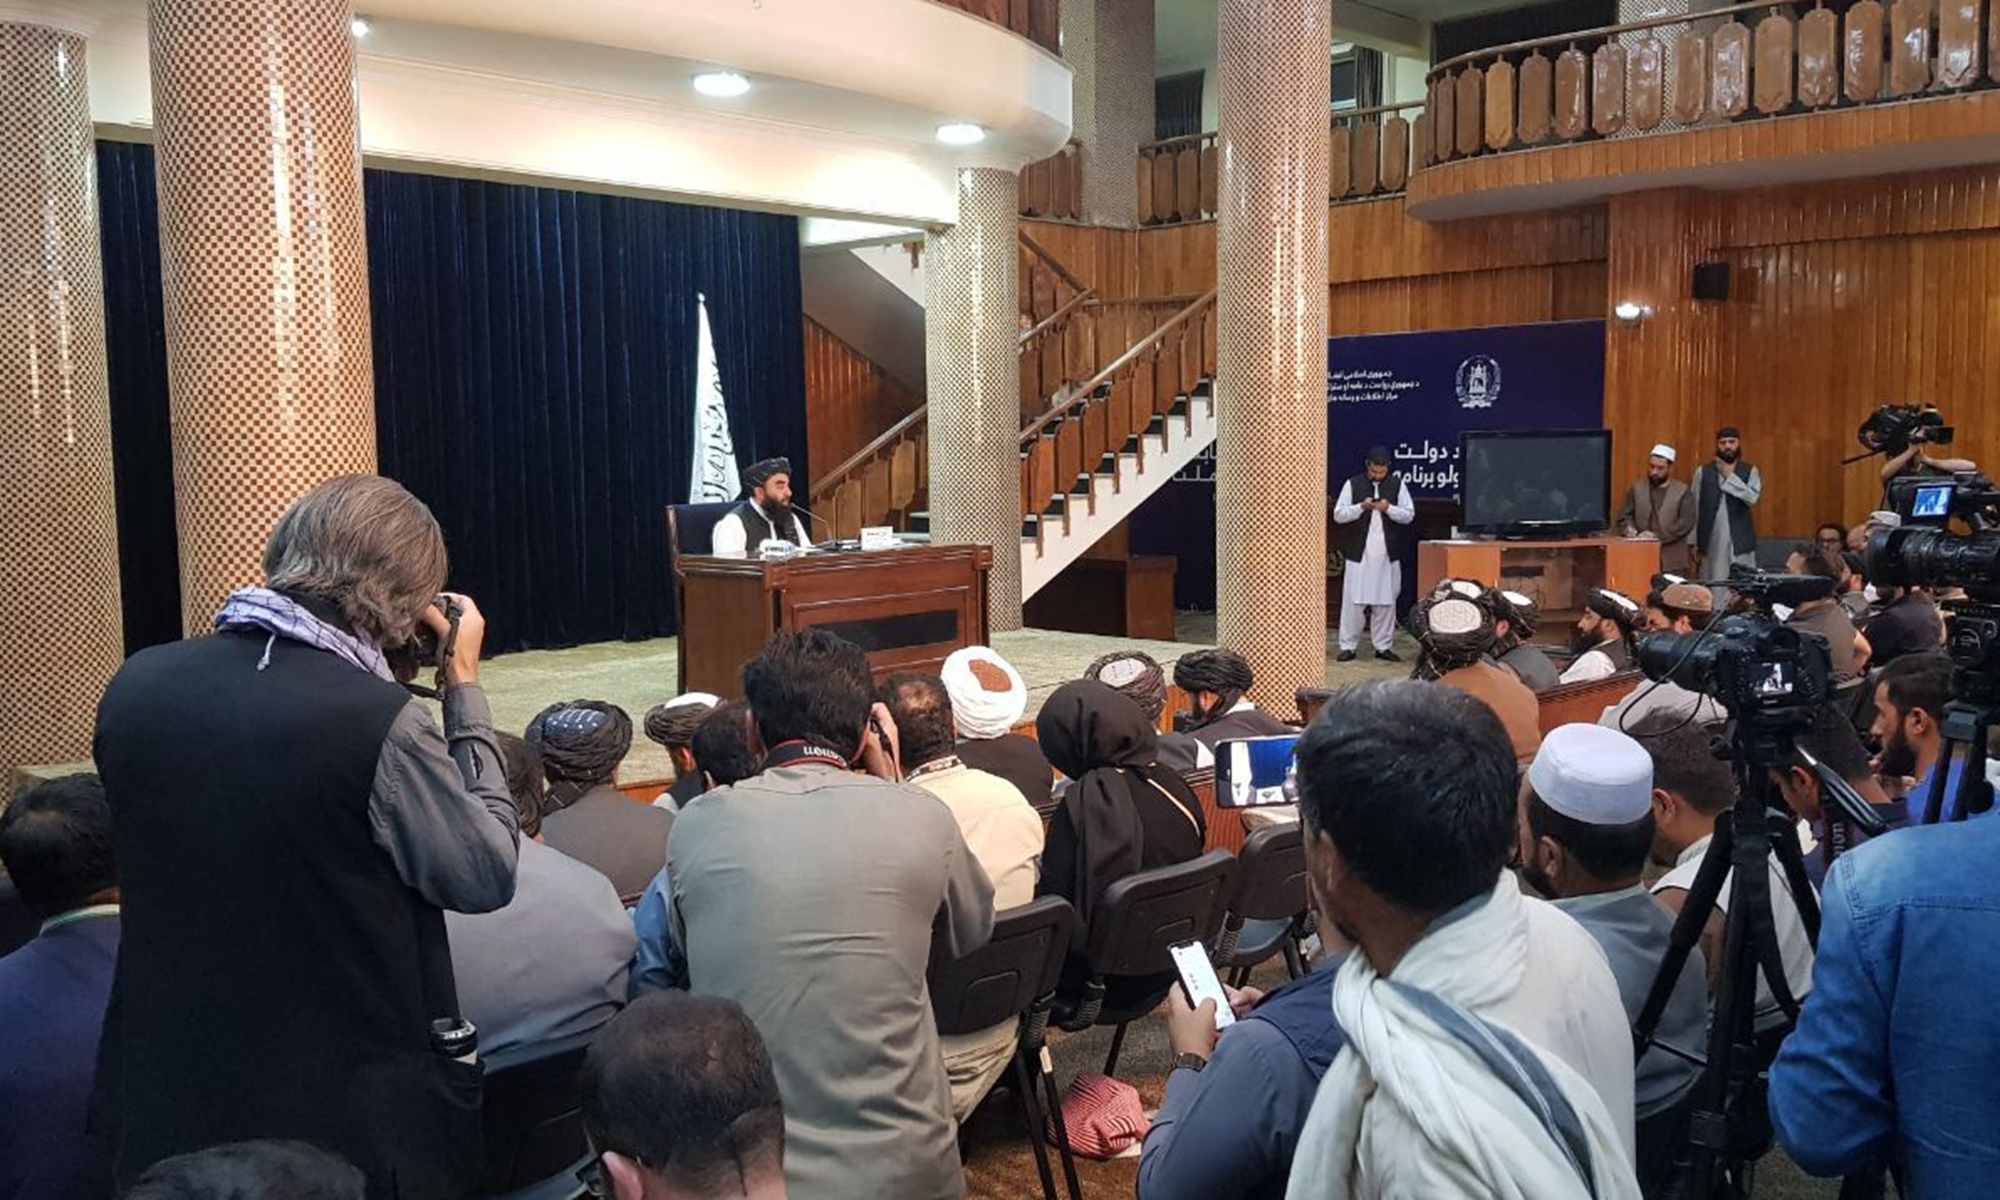 Taliban spokesperson Zabihullah Mujahid holds a press conference in Kabul, Afghanistan on Tuesday. Mujahid announced the new government to rule the country. The Taliban announced Mullah Mohammad Hasan Akhund as the interim leader, while giving key positions to some of the movement’s top officials. Photo: AFP